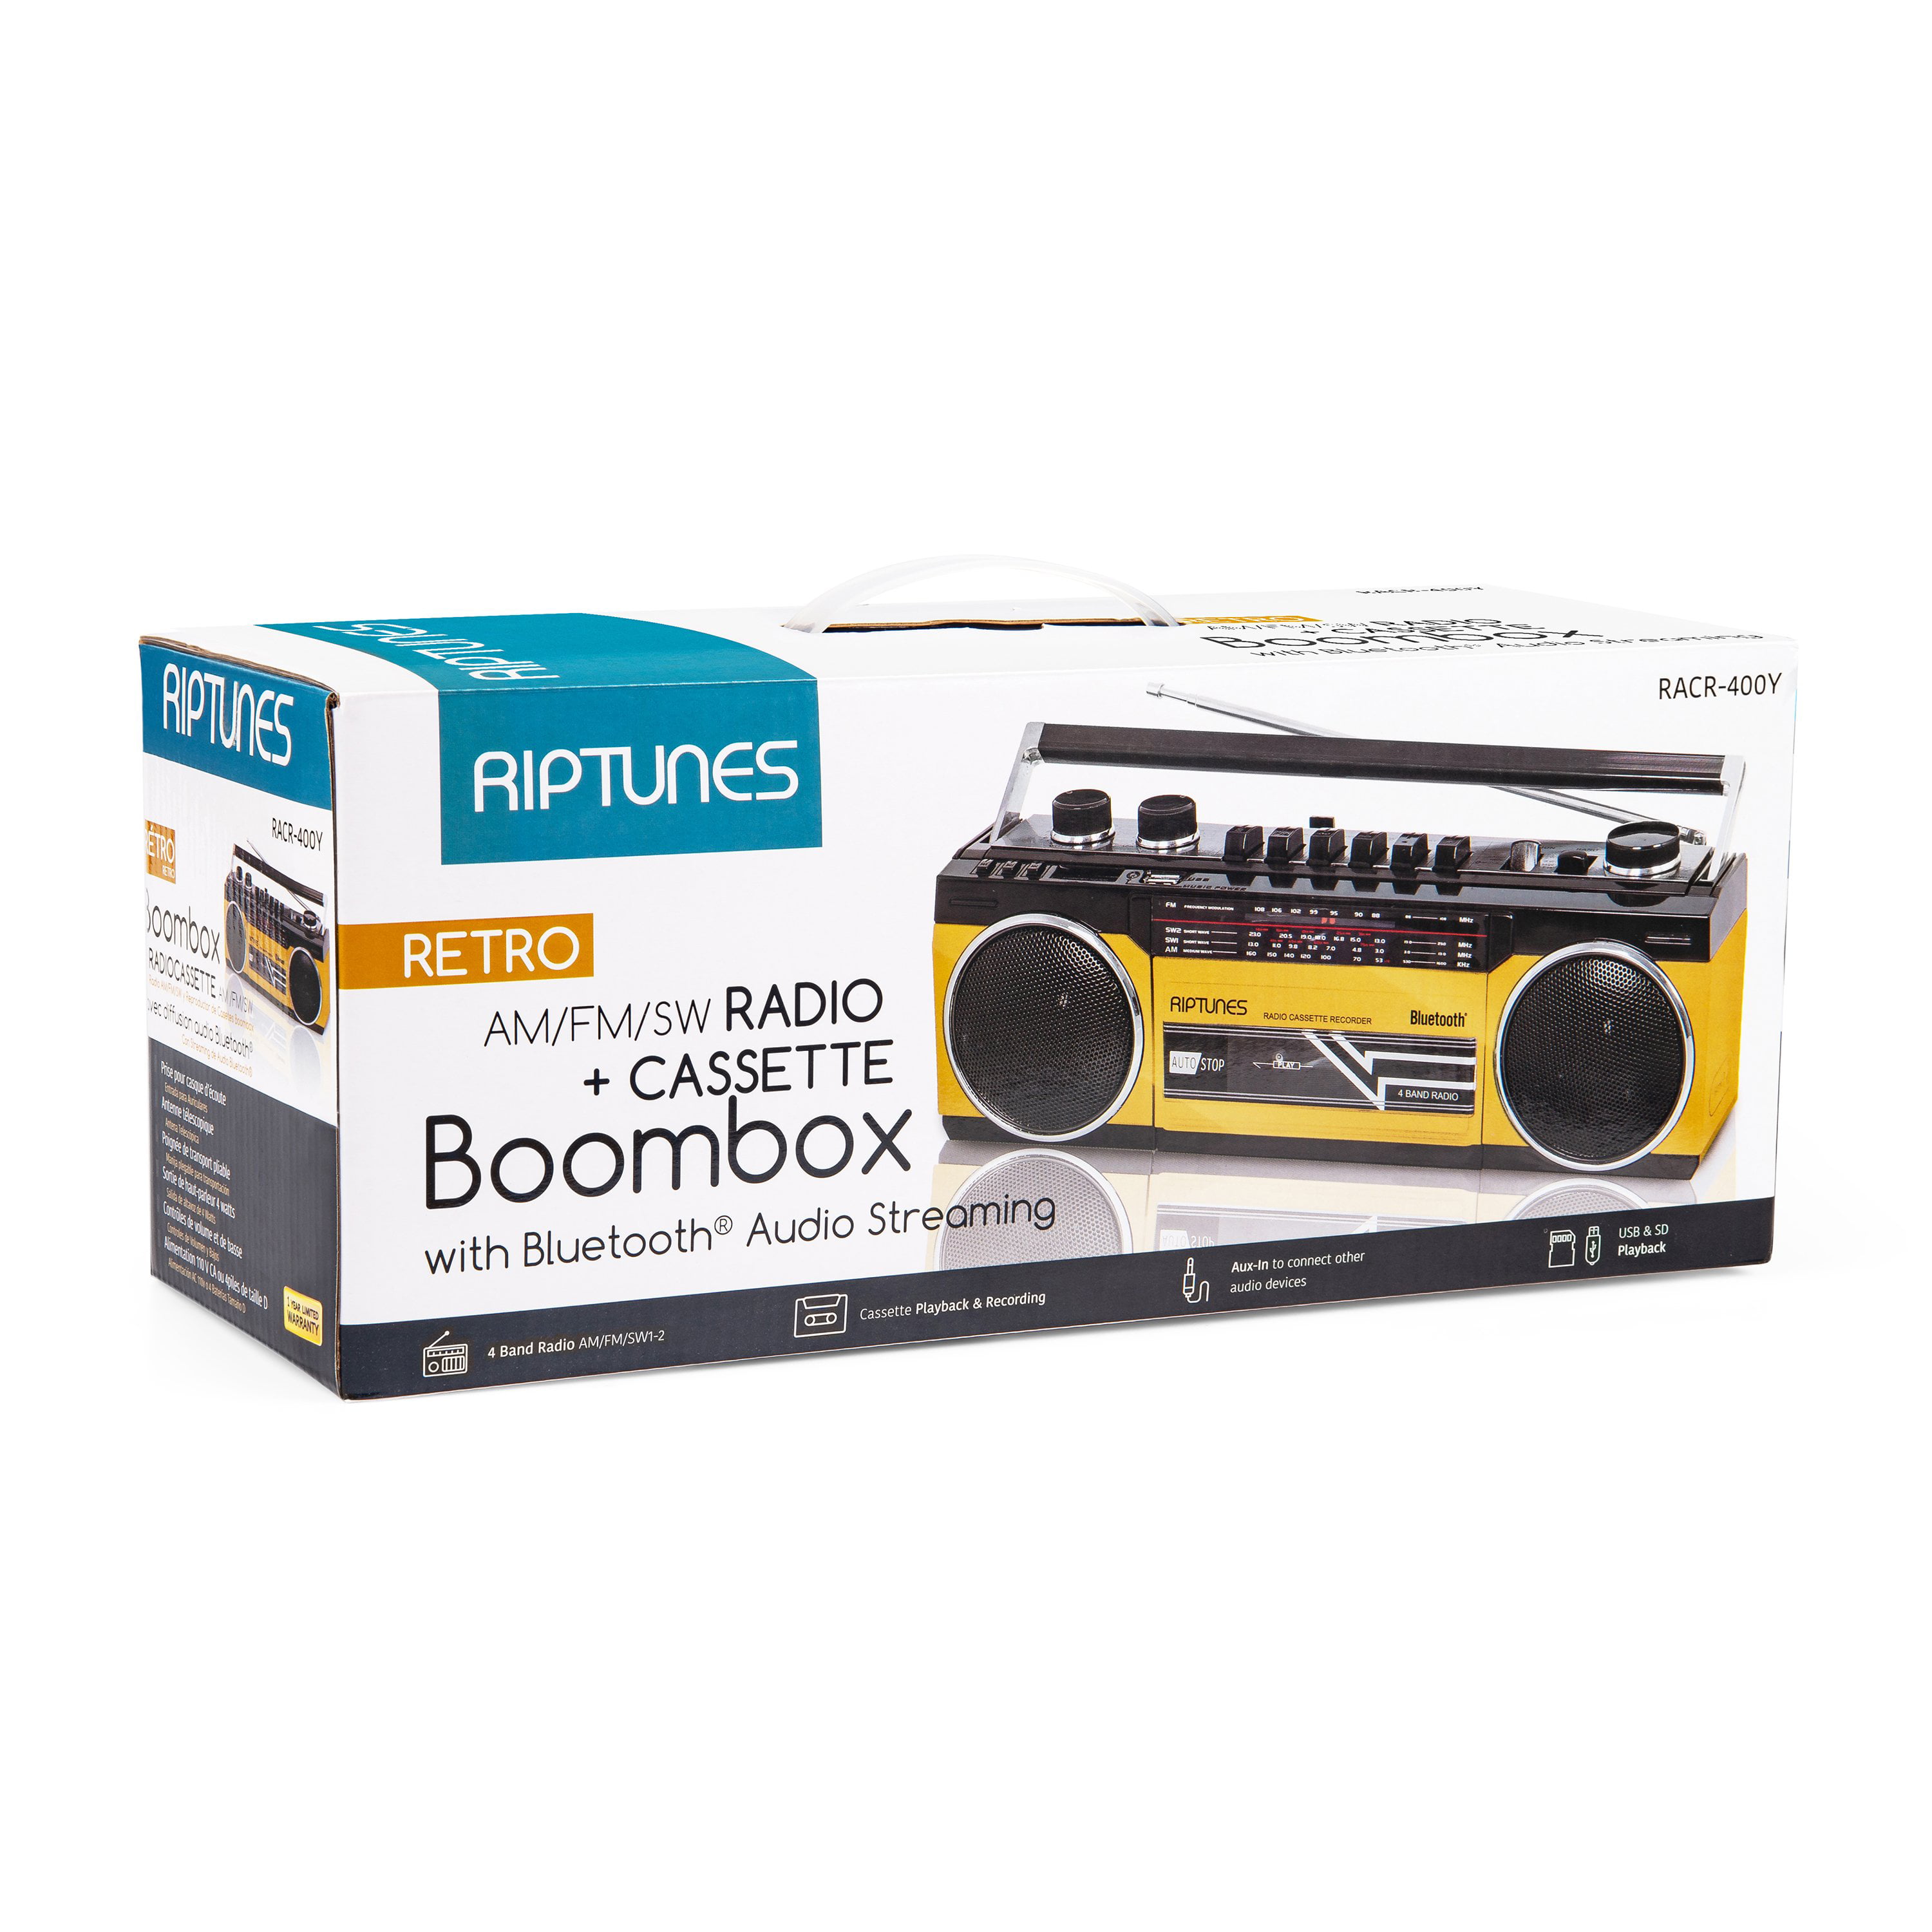 with Recorder, Cassette Radio Riptunes Retro Blueooth and Radio Band Boombox AM/FM/SW1/SW2 Player